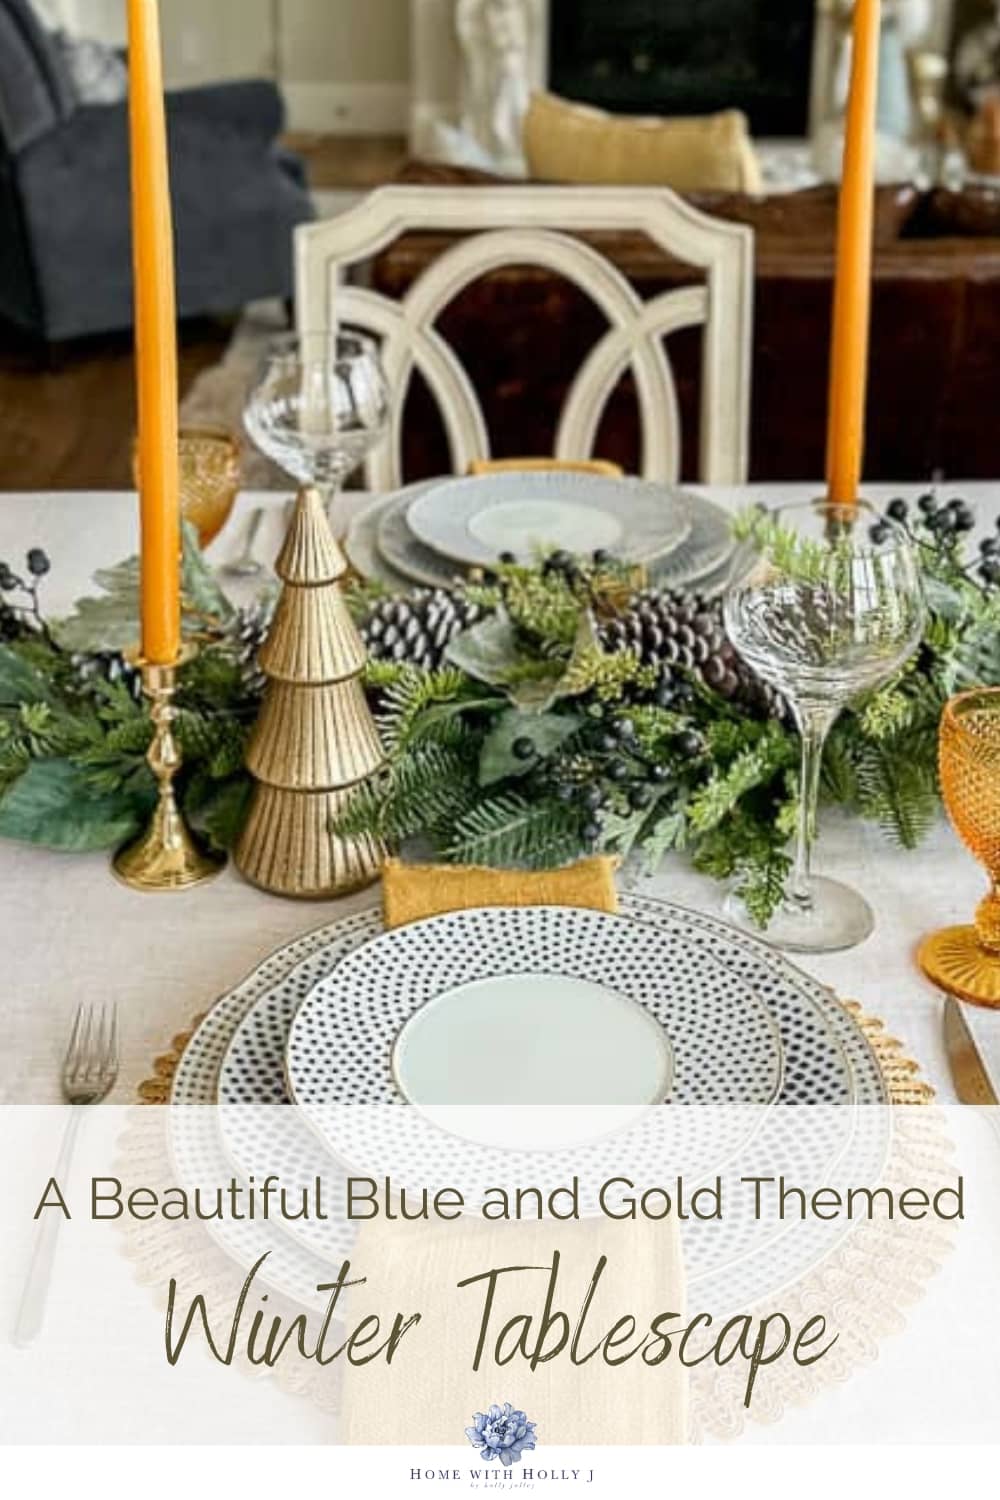 Winter tablescapes are the perfect way to bring in seasonal warmth to your dining table. Get inspired with this blue and gold themed version here.